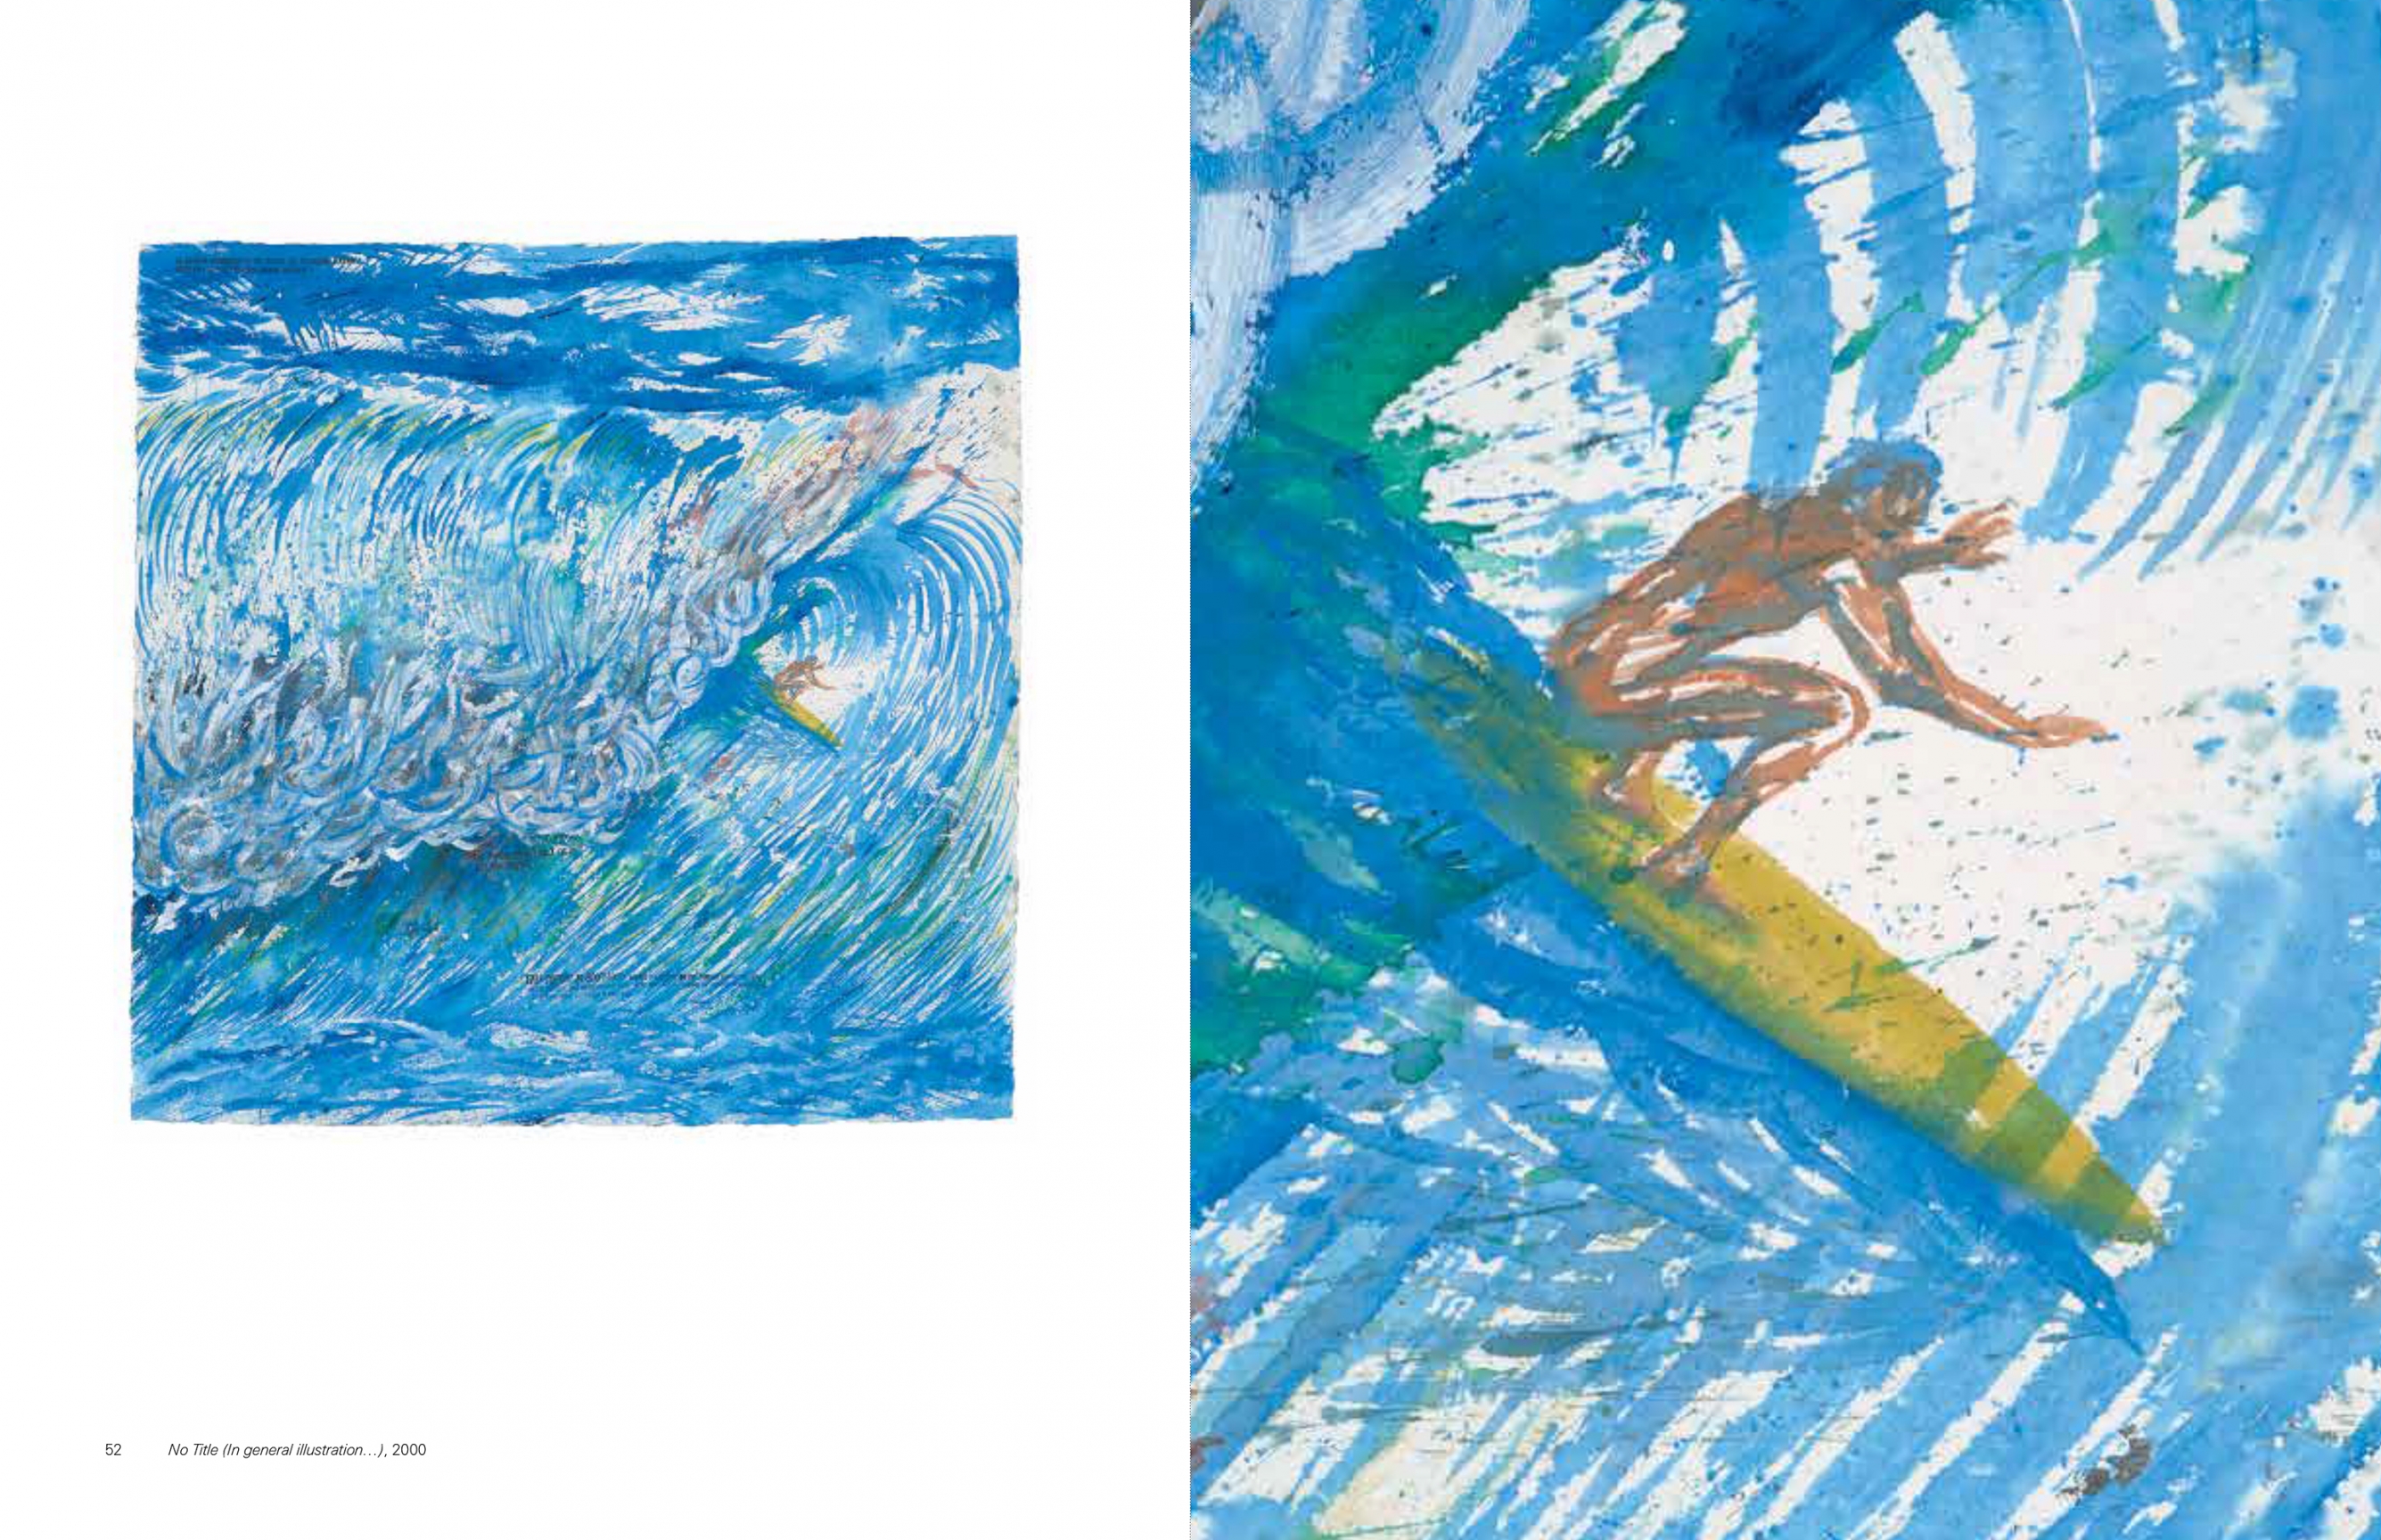 Interior view of Raymond Pettibon: Surfers 1985-2015, published by Venus Over Manhattan and David Zwirner, New York, 2015